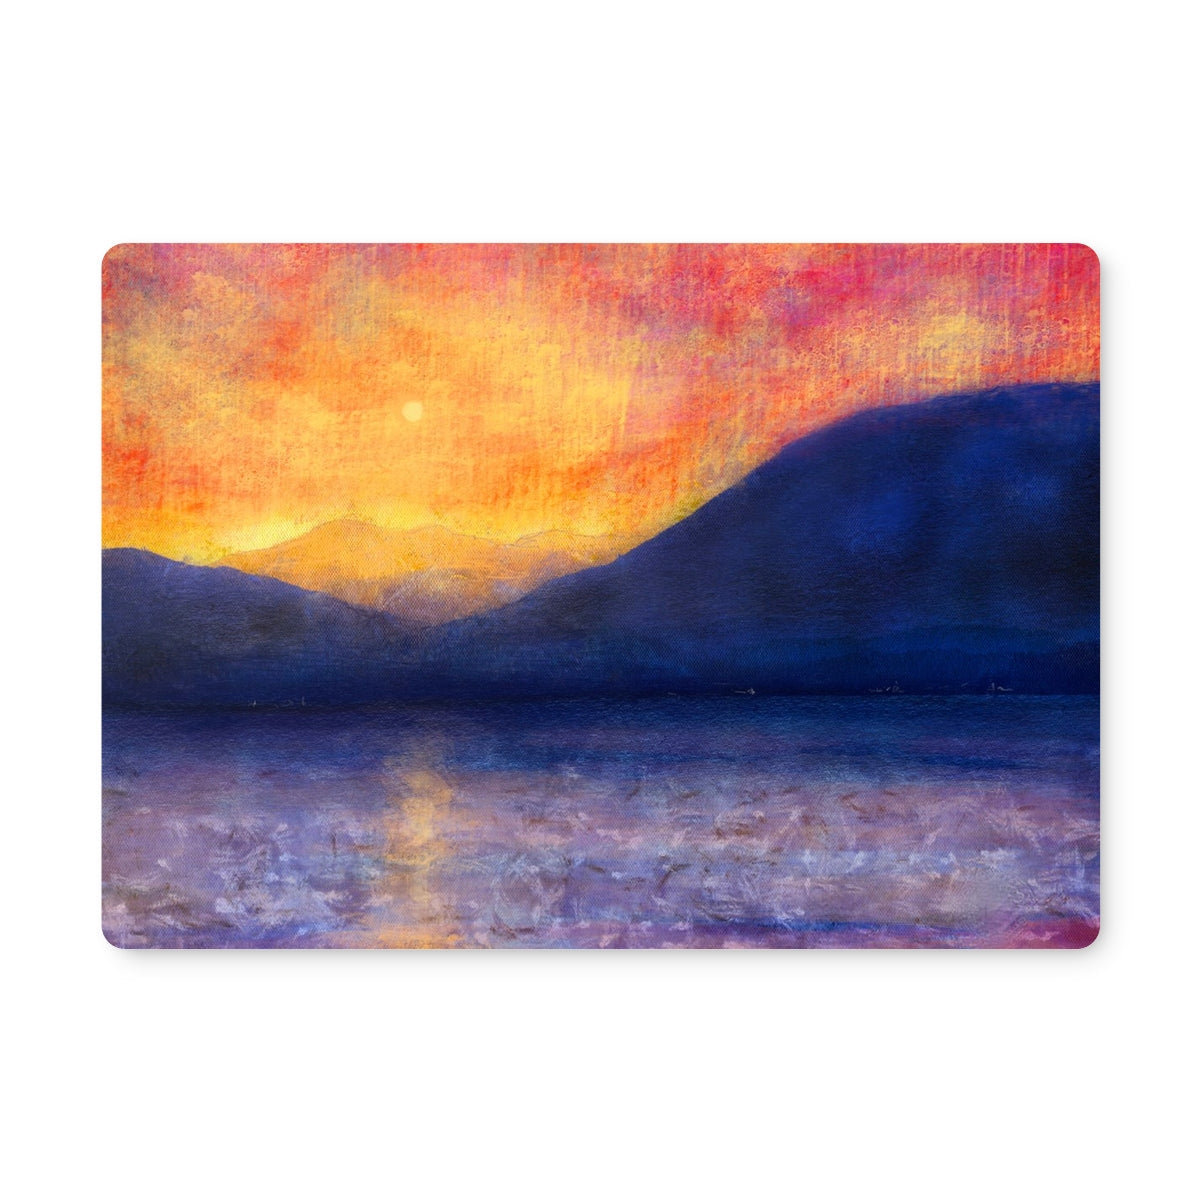 Sunset Approaching Mull Art Gifts Placemat-Placemats-Hebridean Islands Art Gallery-2 Placemats-Paintings, Prints, Homeware, Art Gifts From Scotland By Scottish Artist Kevin Hunter